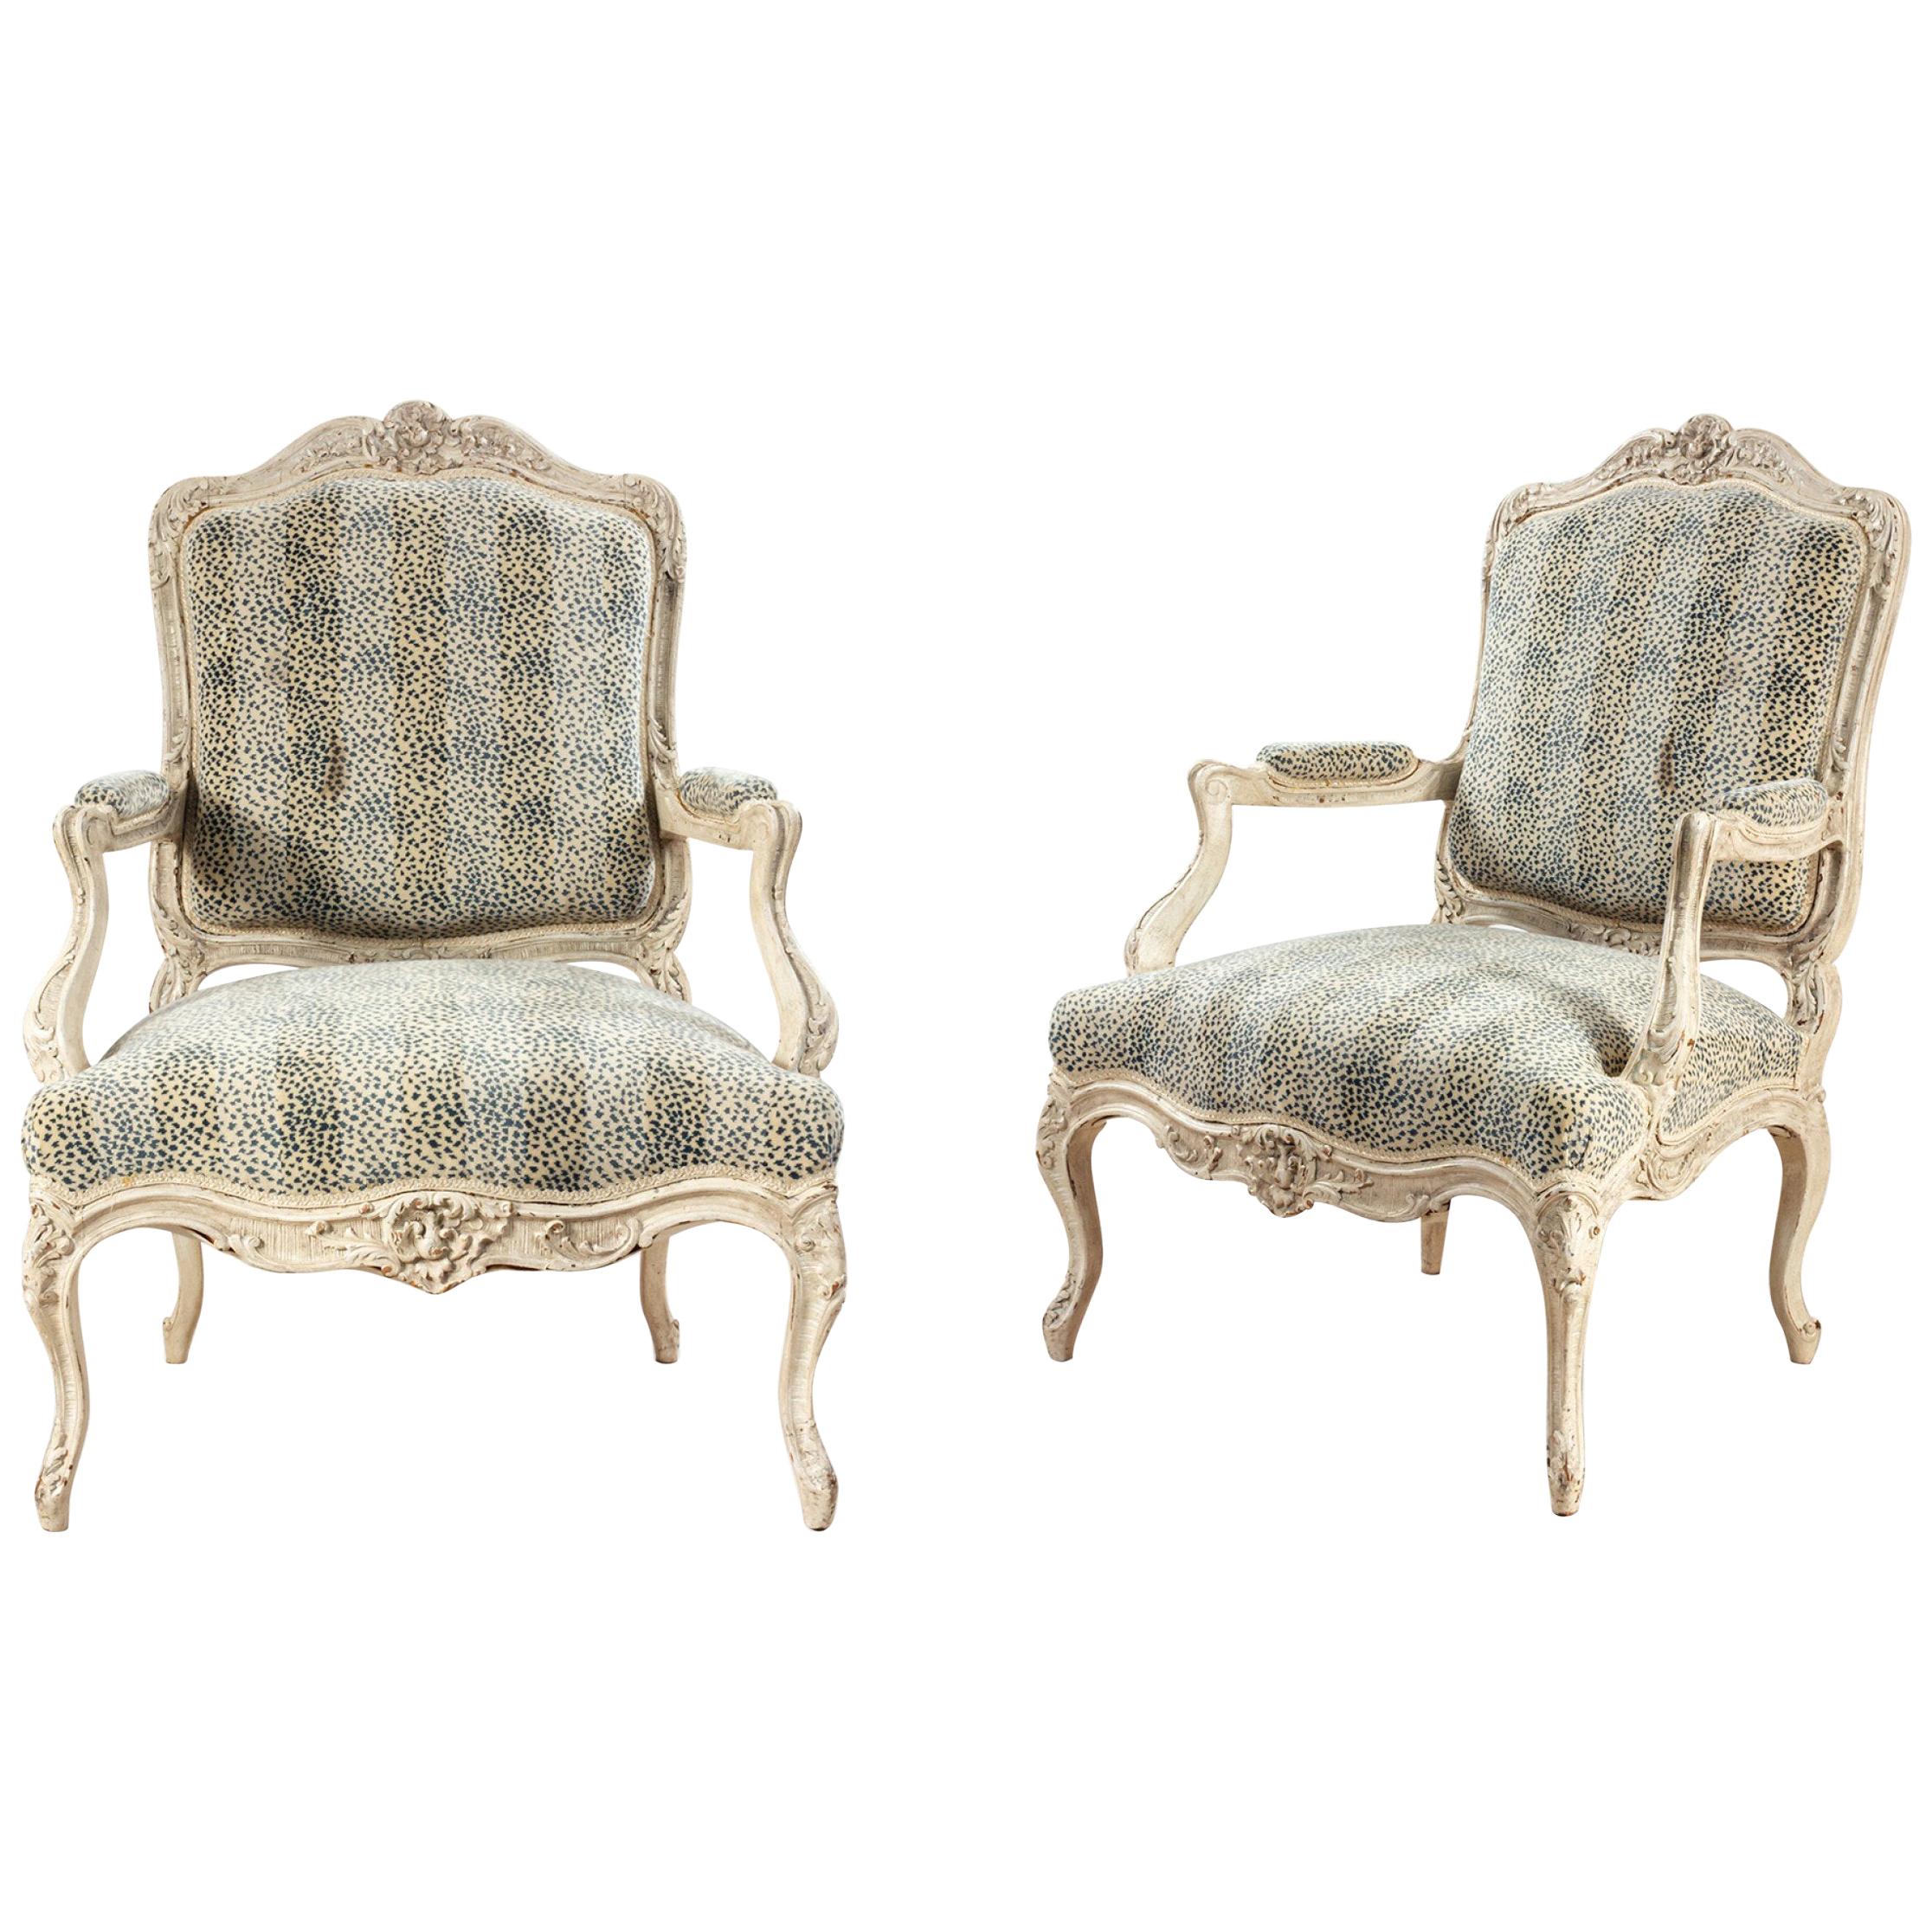 Pair of Cream Louis XV Style Carved Open Armchairs with Leopard Upholstery For Sale